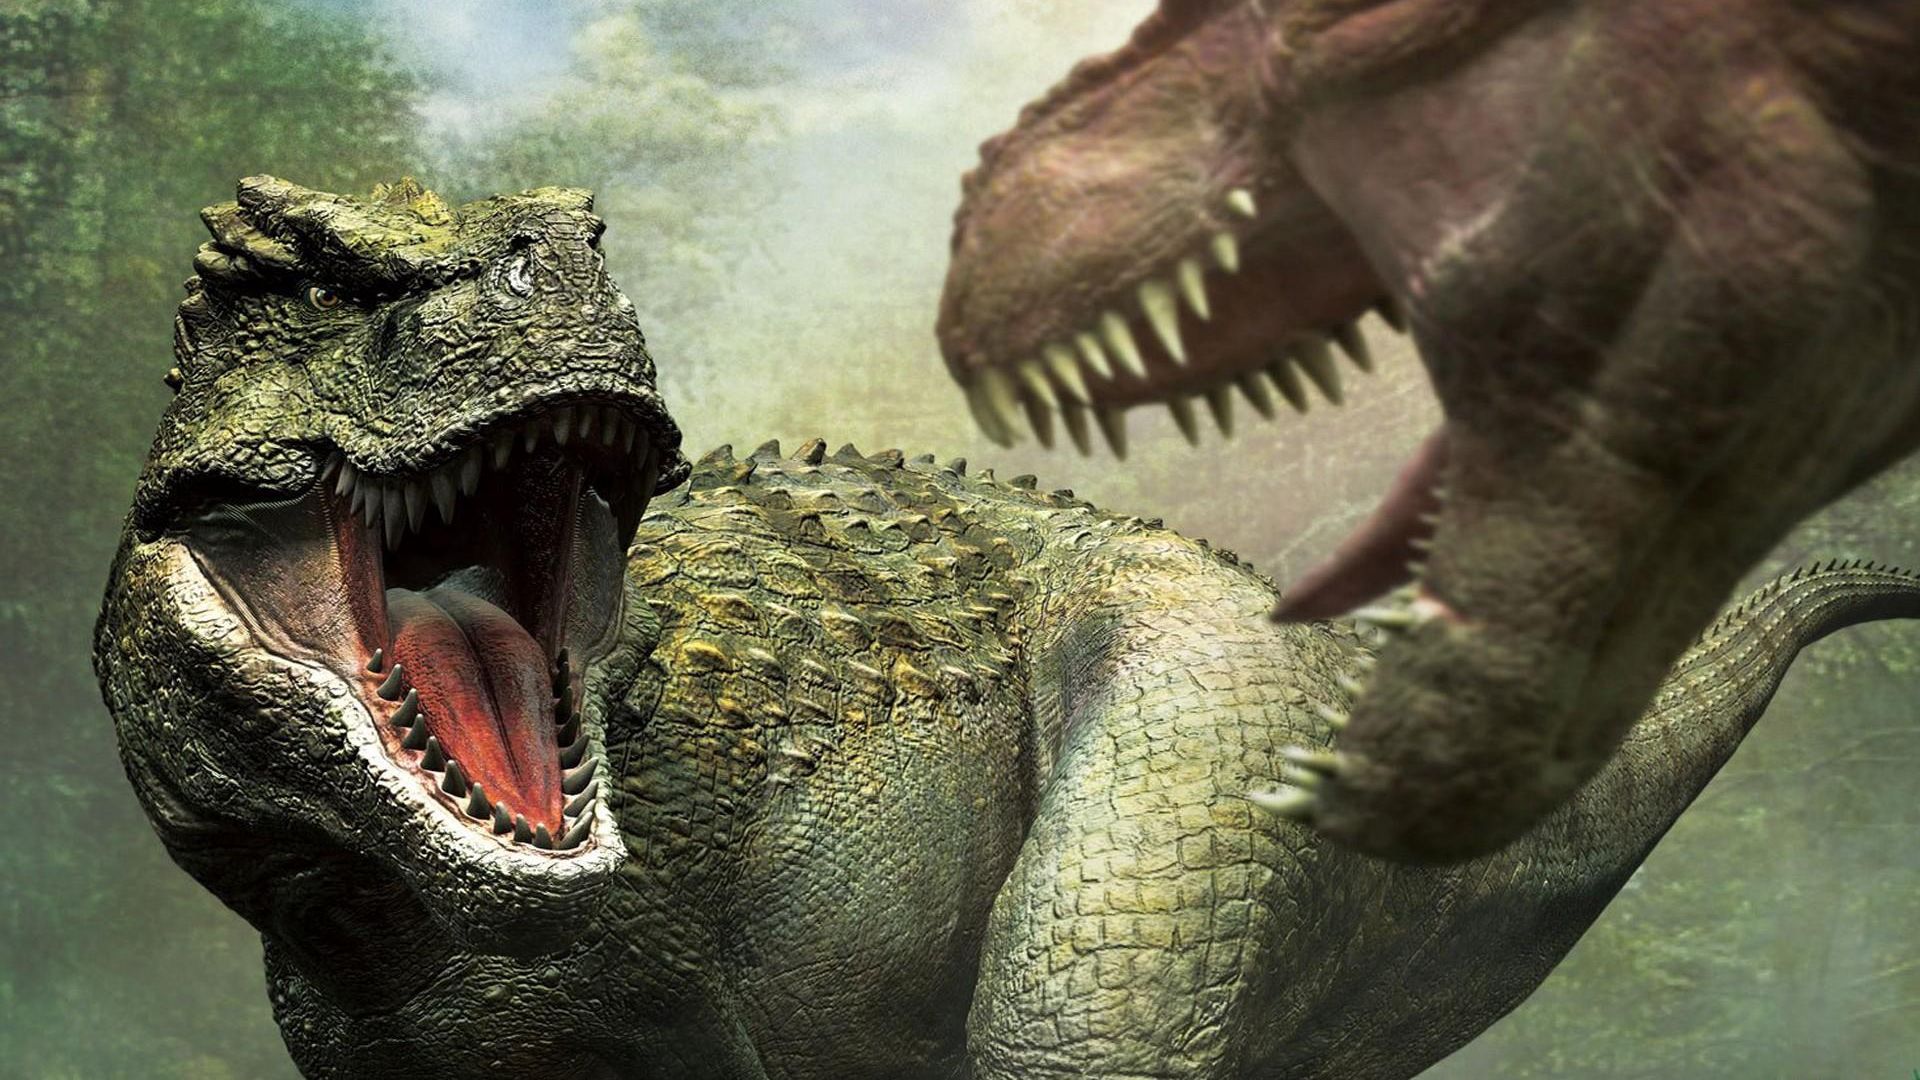 Download wallpaper 1920x1080 dinosaurs, mouth, fangs, aggression full hd,  hdtv, fhd, 1080p hd background